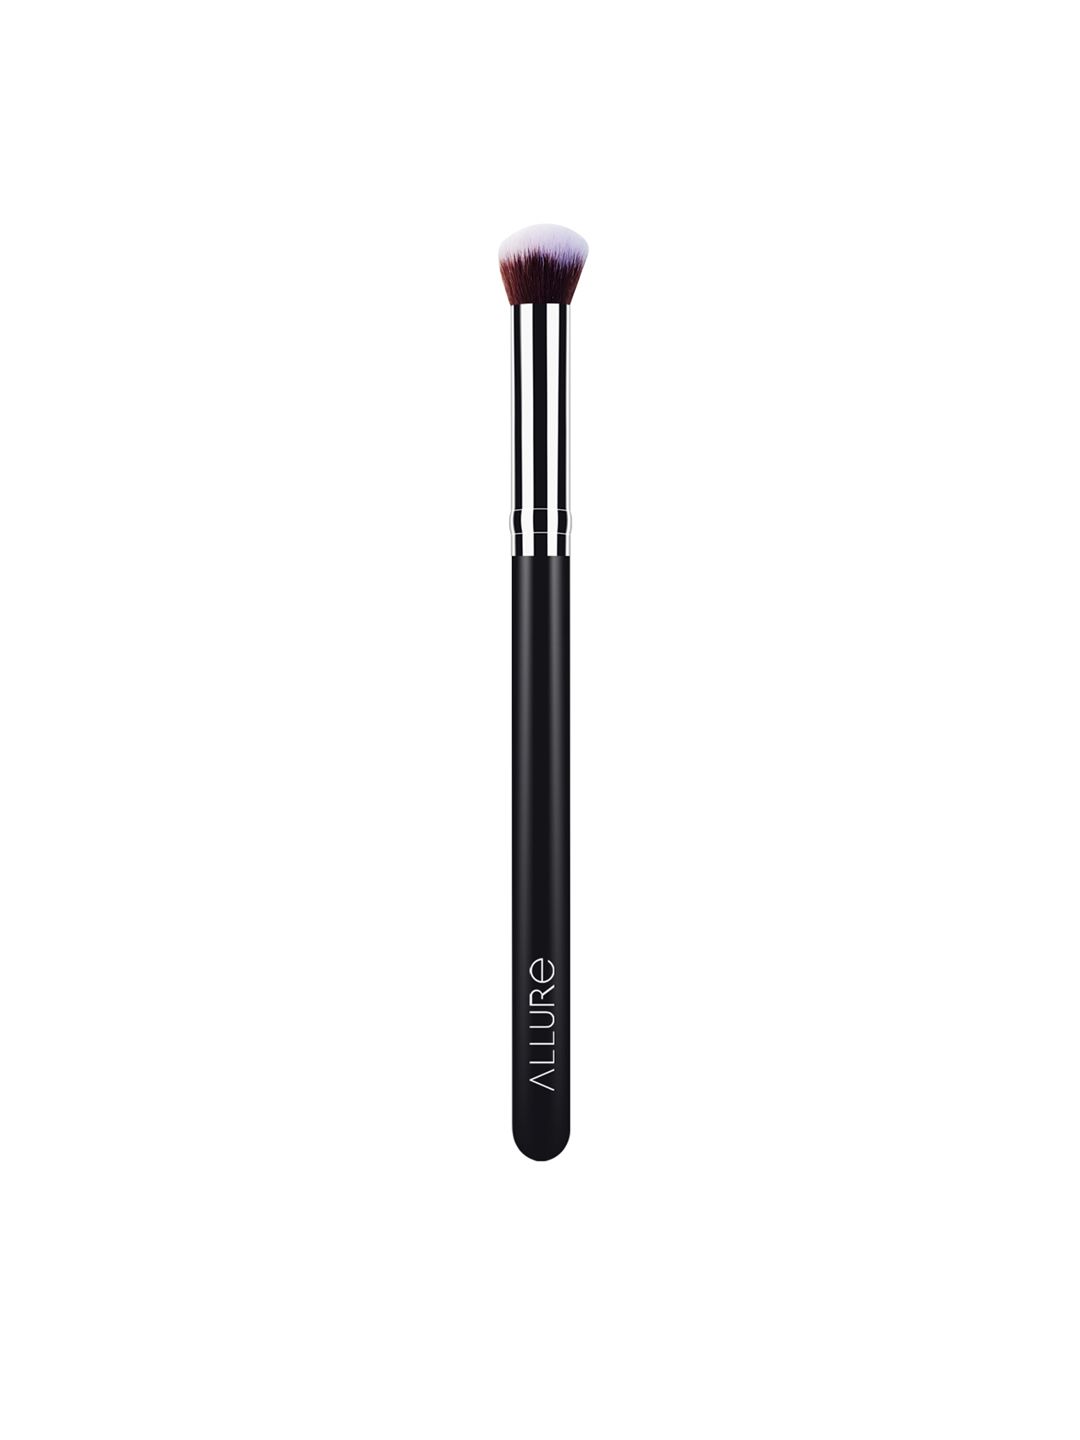 ALLURE Professional Highlighter Makeup Brush - 141 Price in India